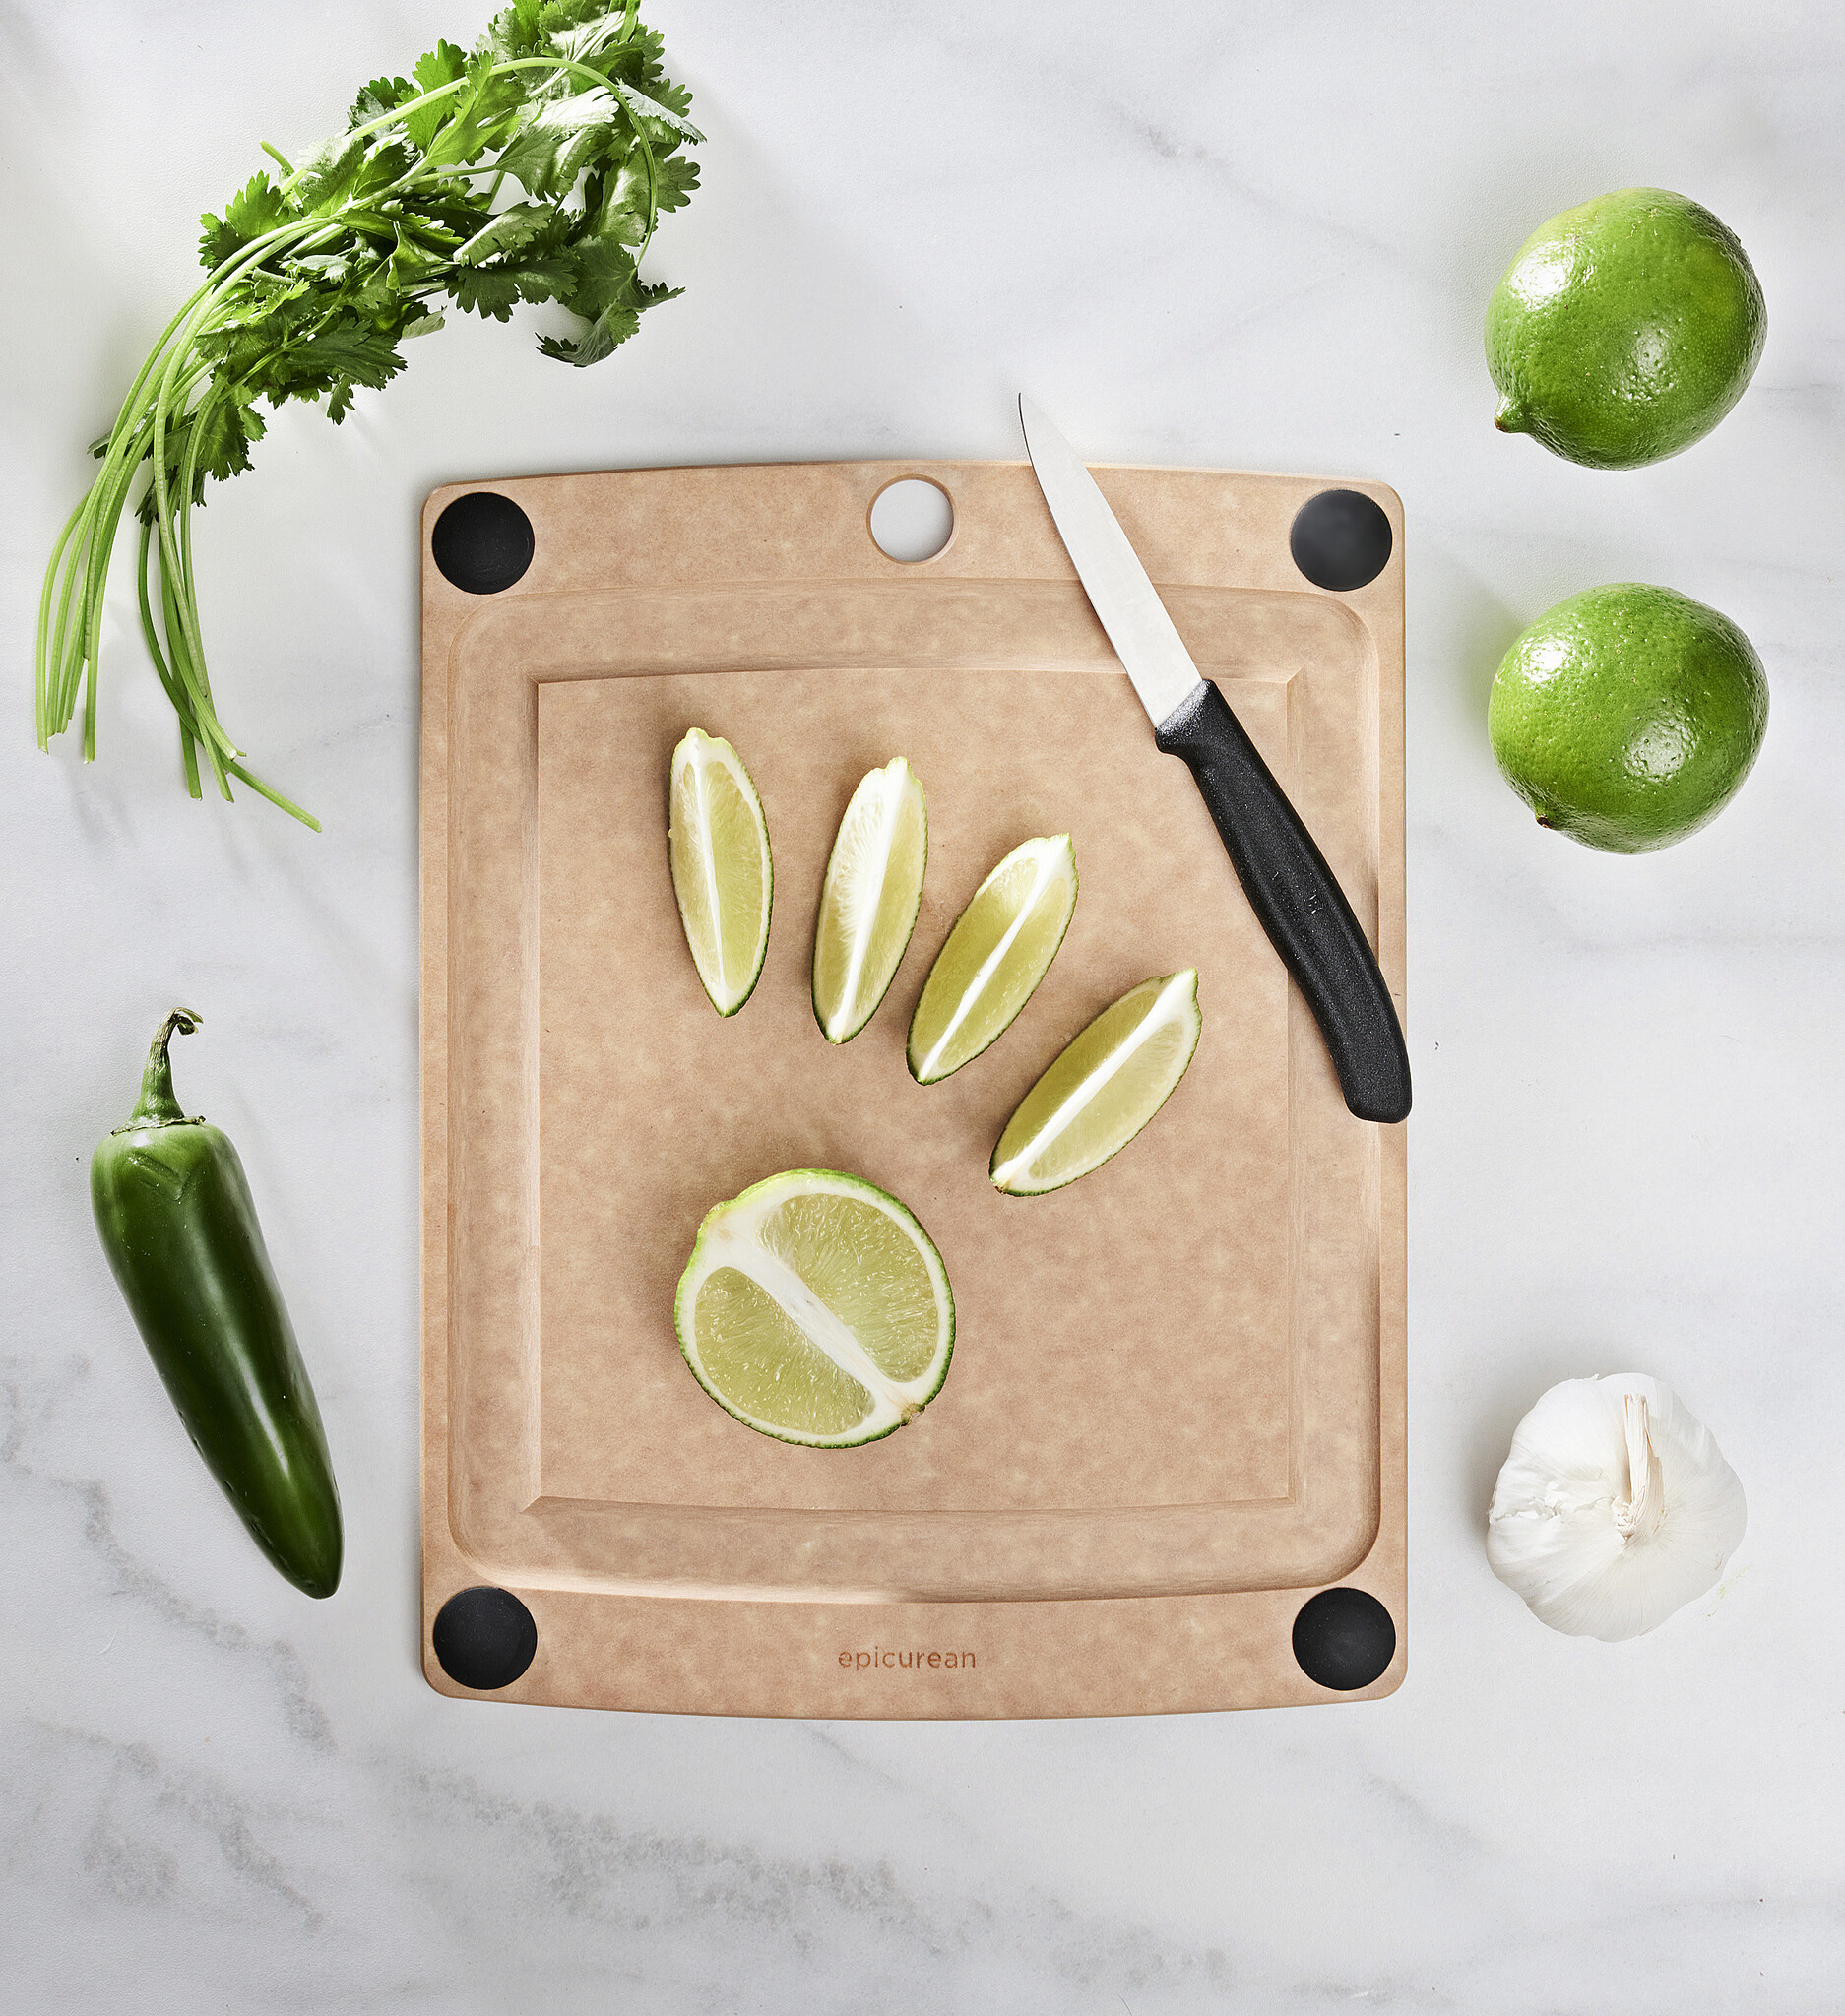 Epicurean Cutting Surfaces Cutting Board 11.5x9 Natural w/Black Buttons